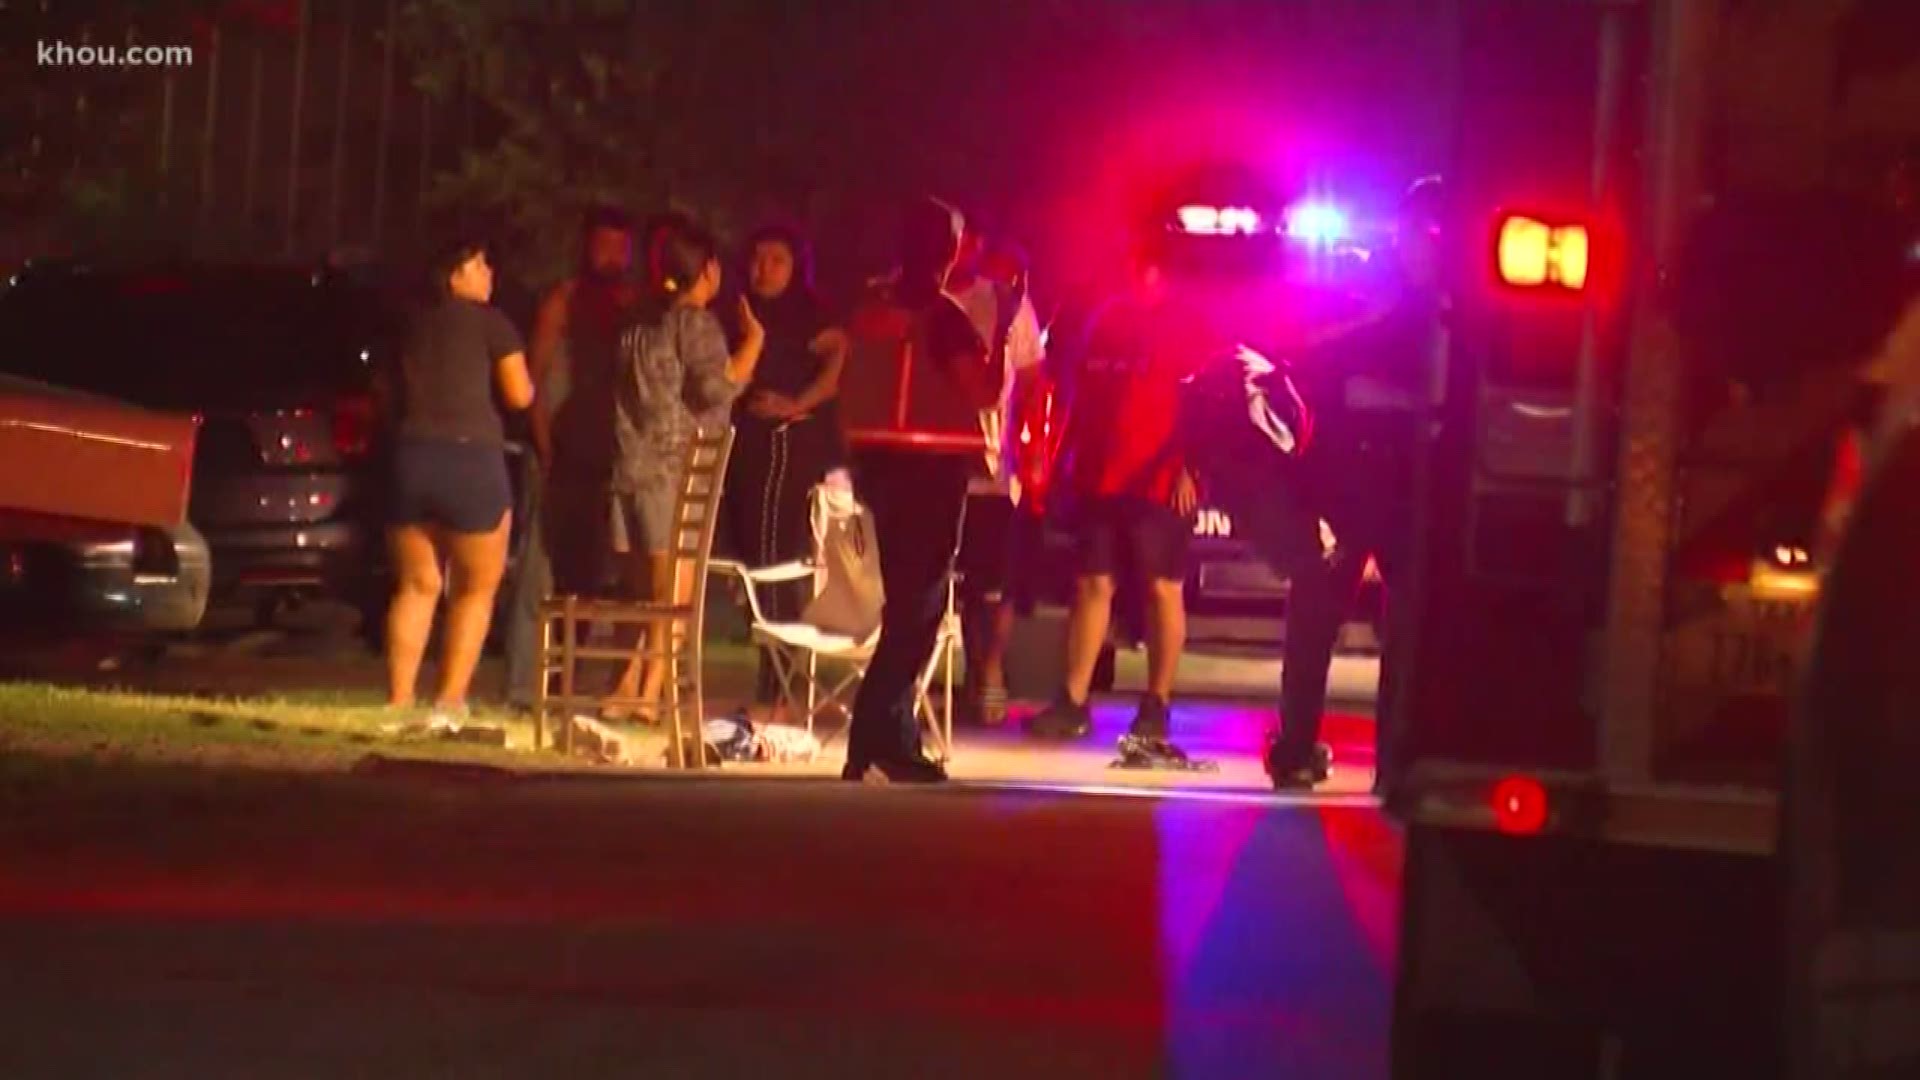 A man is dead after a drive-by shooting in northwest Houston. Two others were also shot. They were taken to the hospital ins serious condition, according to police.